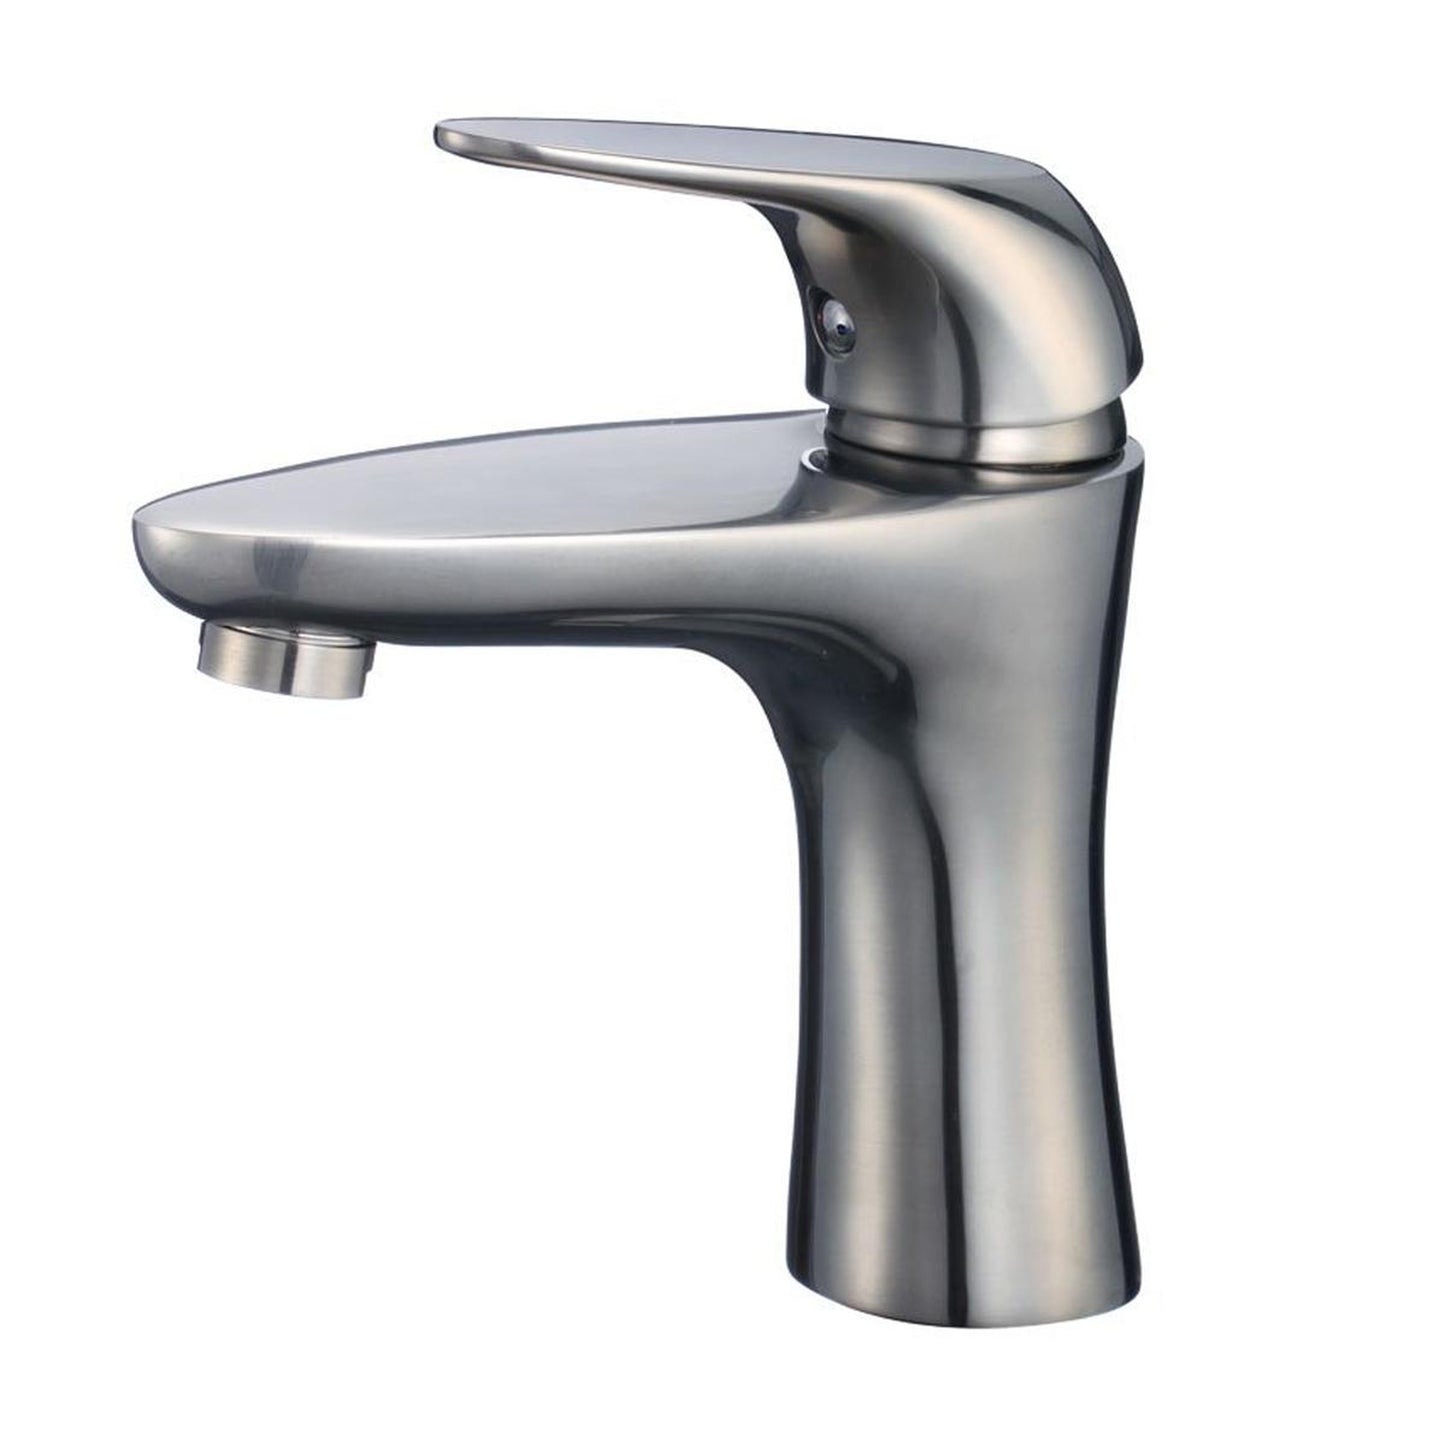 Pelican Int'l Cascade Series PL-8164 Single Hole Bathroom Faucet In Brushed Nickel Finish